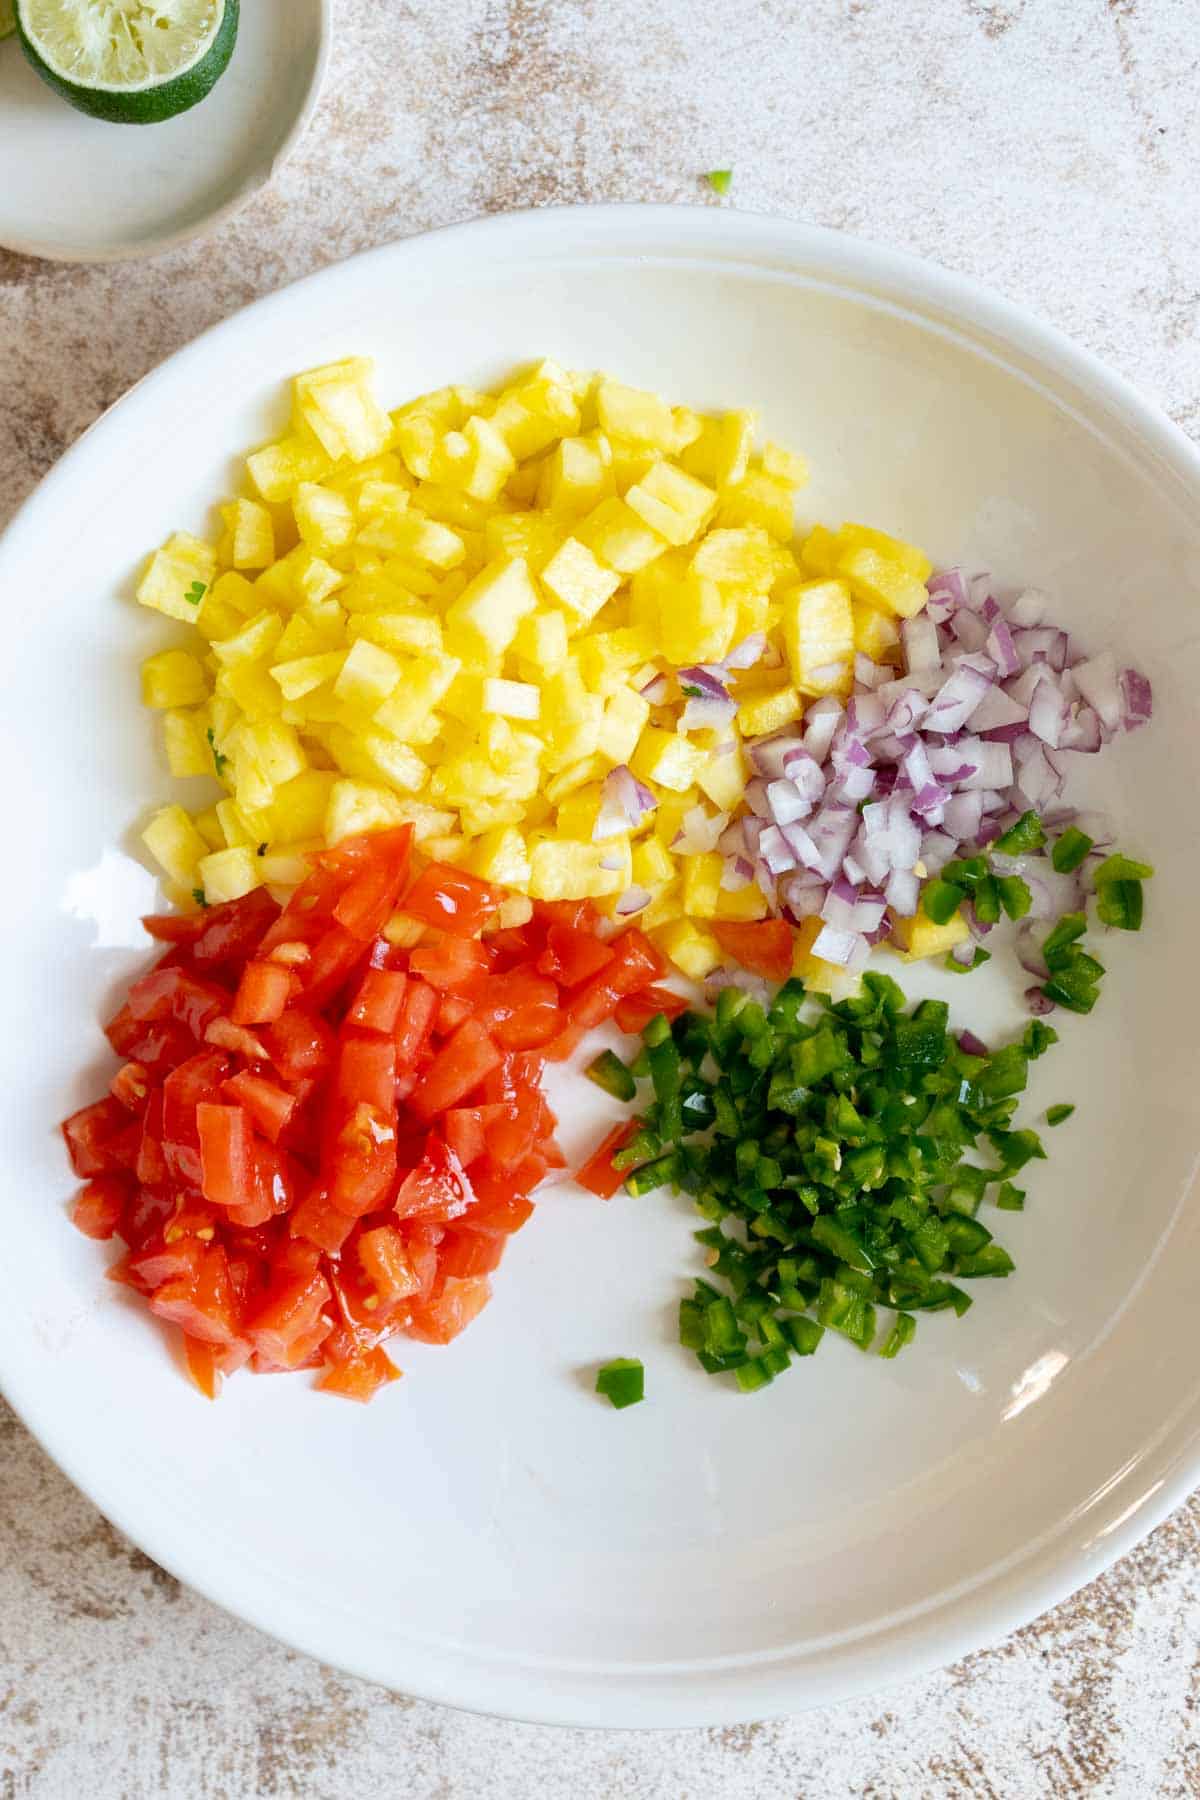 Chopped ingredients in a mixing bowl.